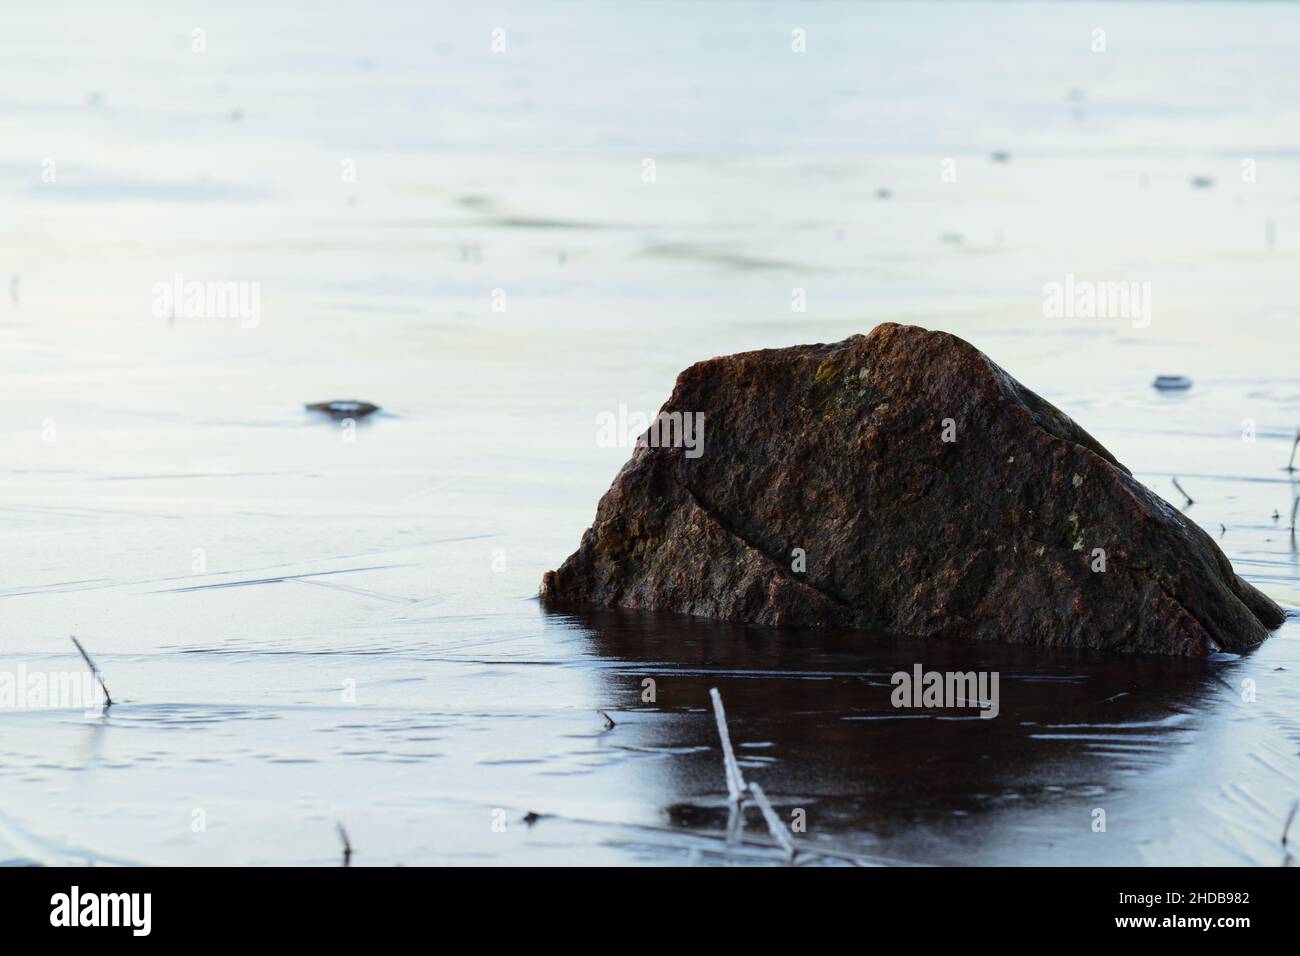 A rock awaits the thaw as it is frozen into the winter of Loch Morlich, Scotland Stock Photo